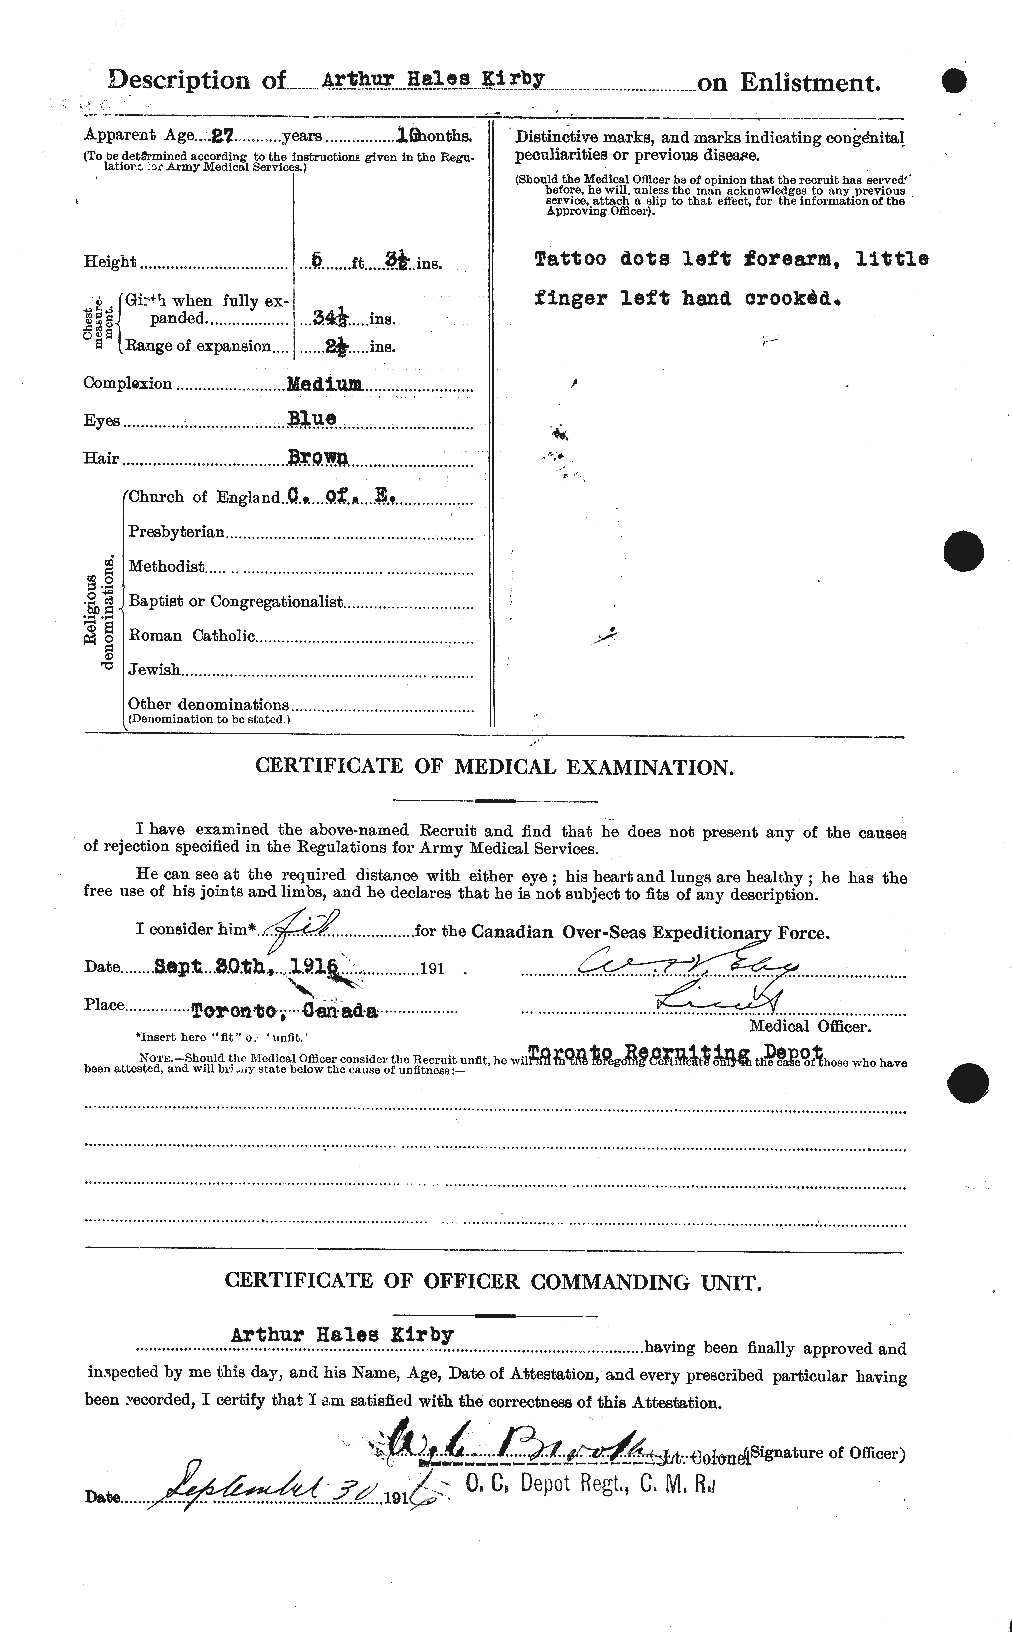 Personnel Records of the First World War - CEF 437156b